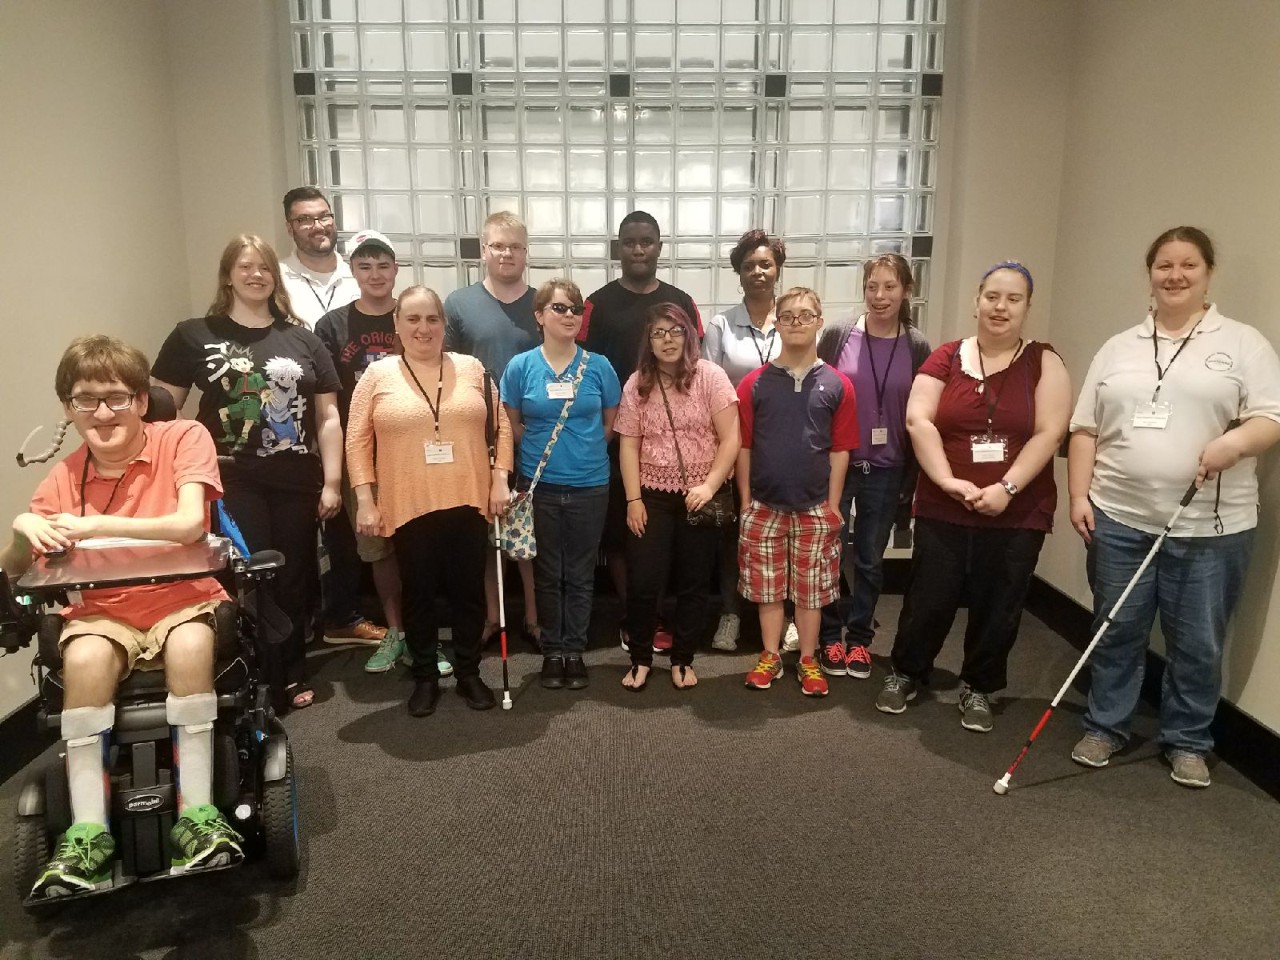 a group photo of about 10 young adults with various types of visible and invisible disabilities, and several adults with and without disabilities who helped lead the youth leadership program that the article will describe